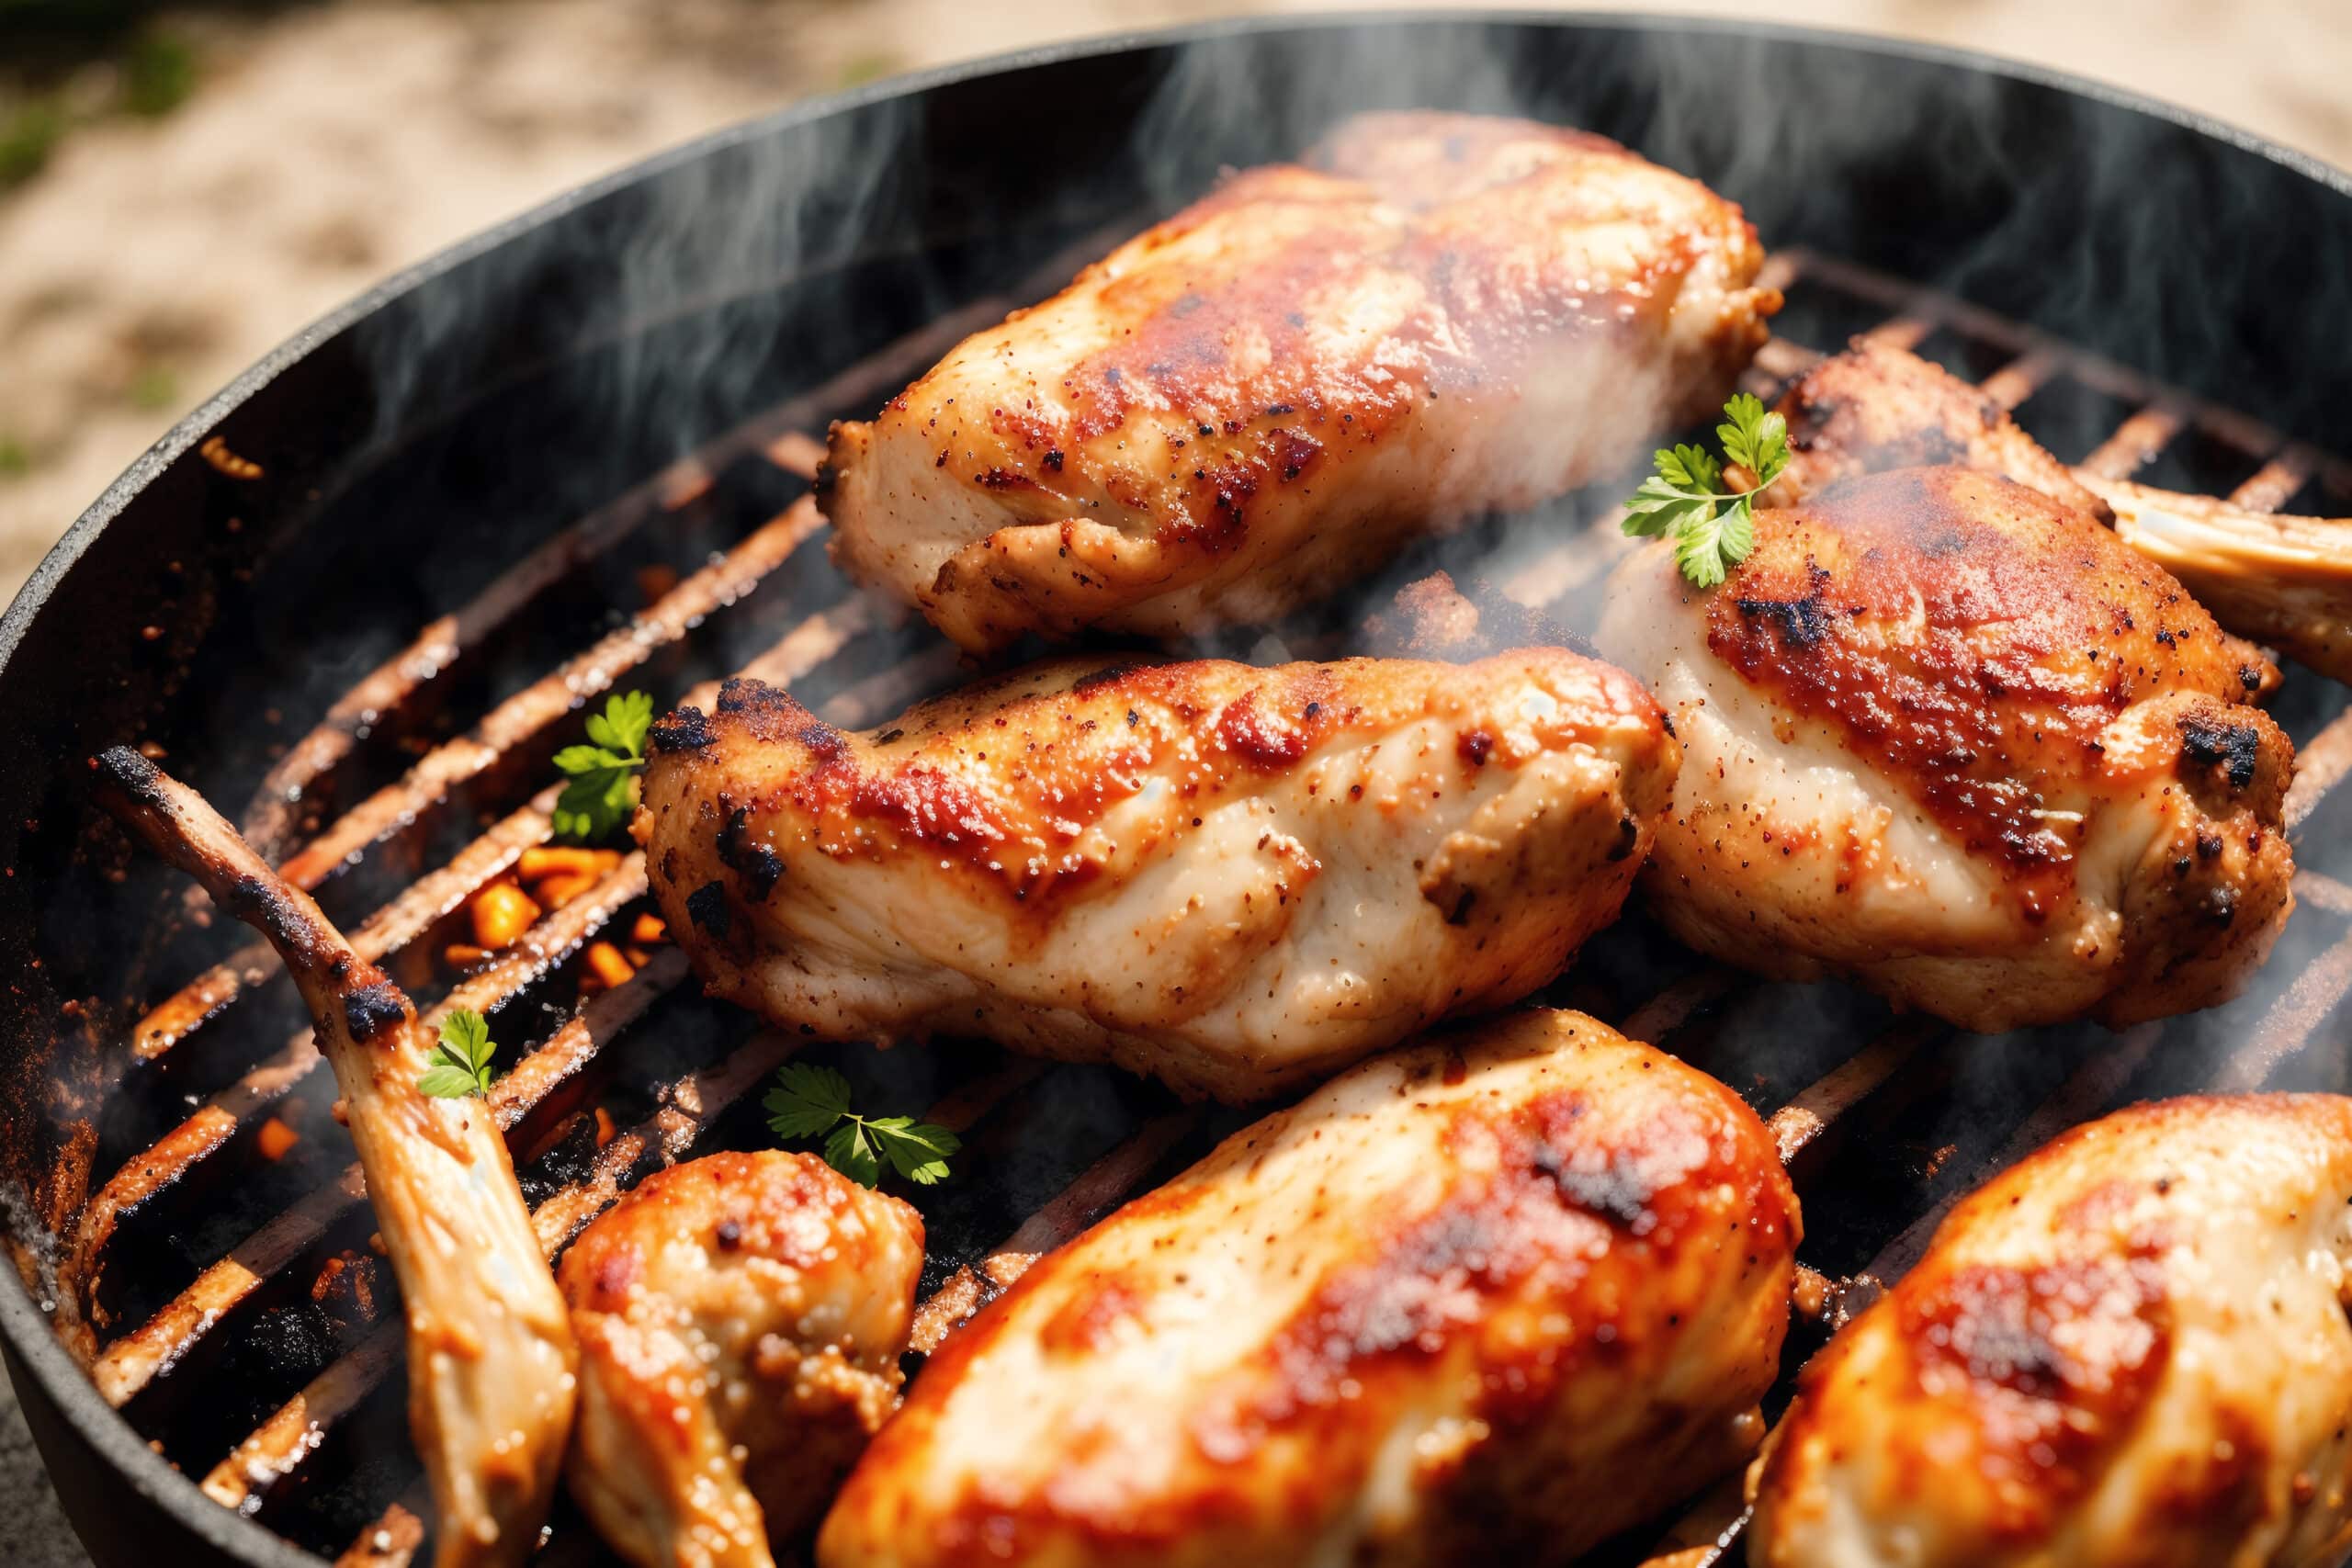 www.appr.com : What Temp To Smoke Chicken Breast On Pellet Grill?